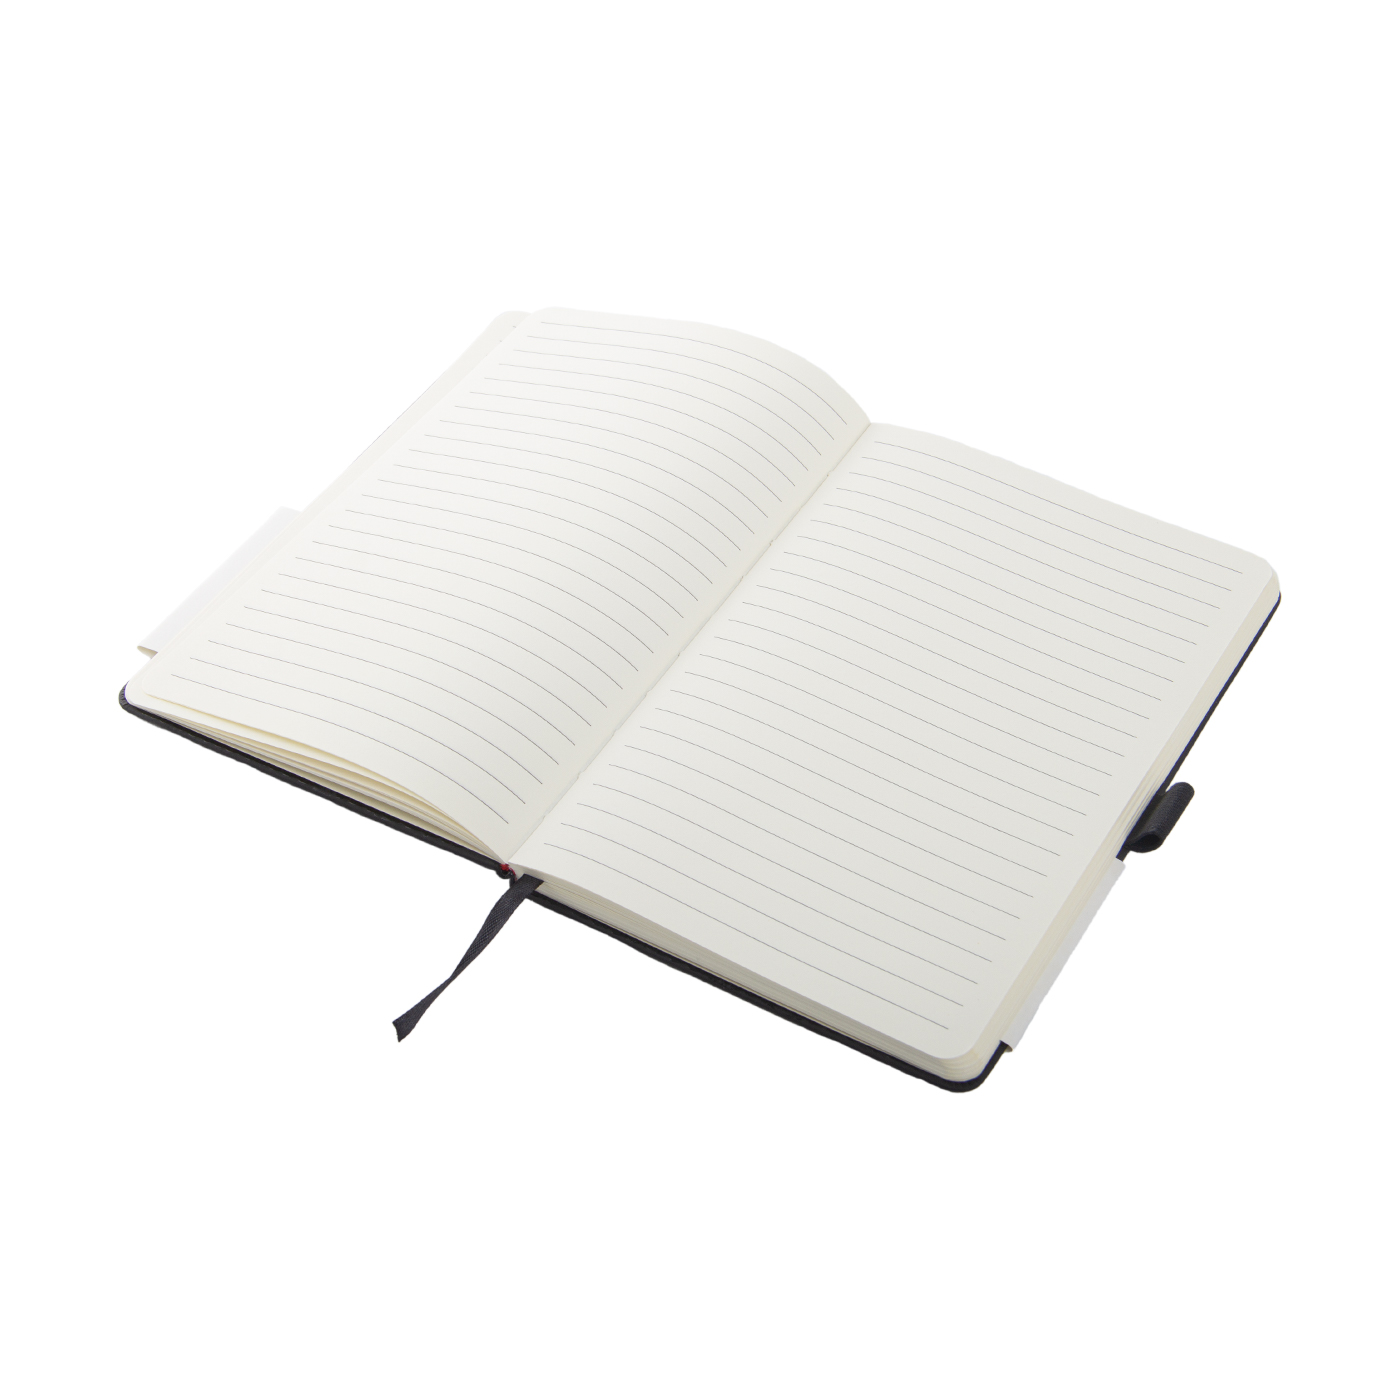 Wholesale Classic Ruled Hardcover PU Leather Notebook2